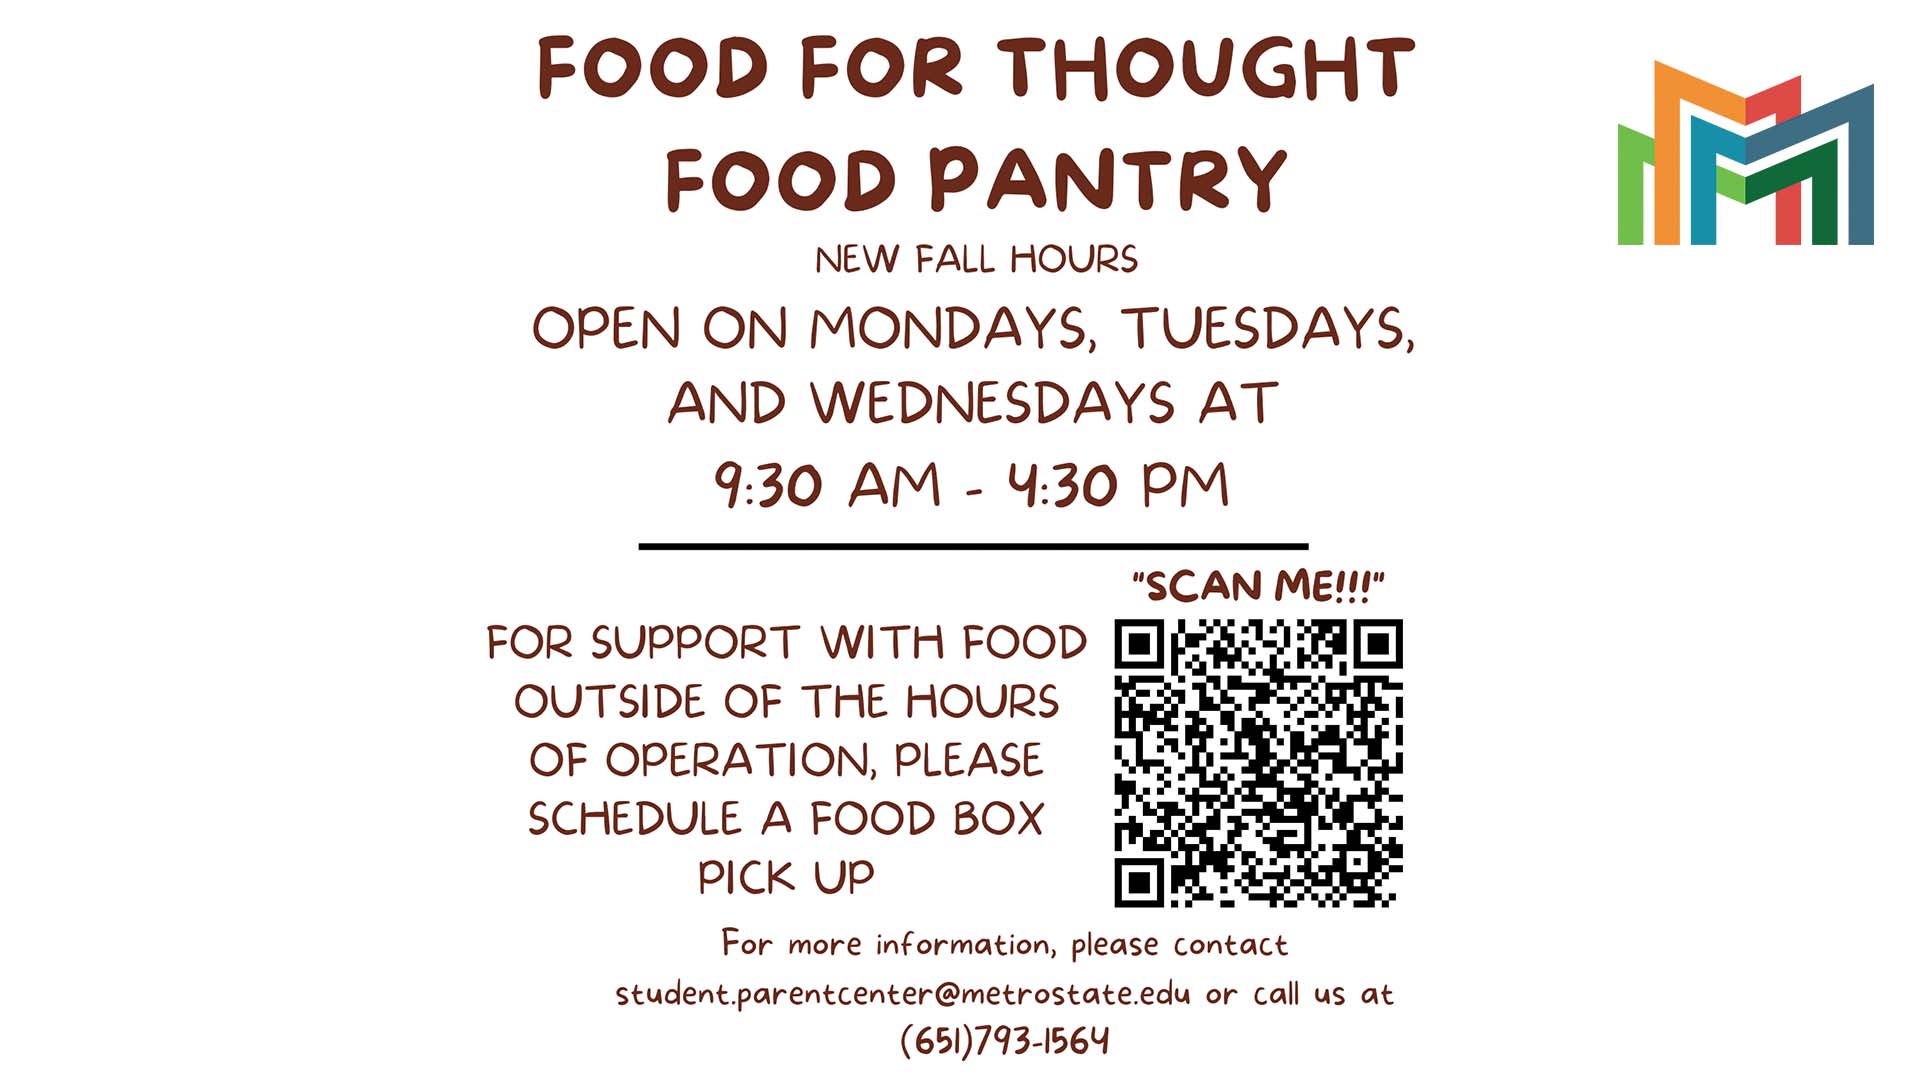 Food for thought food pantry hours and information sign up